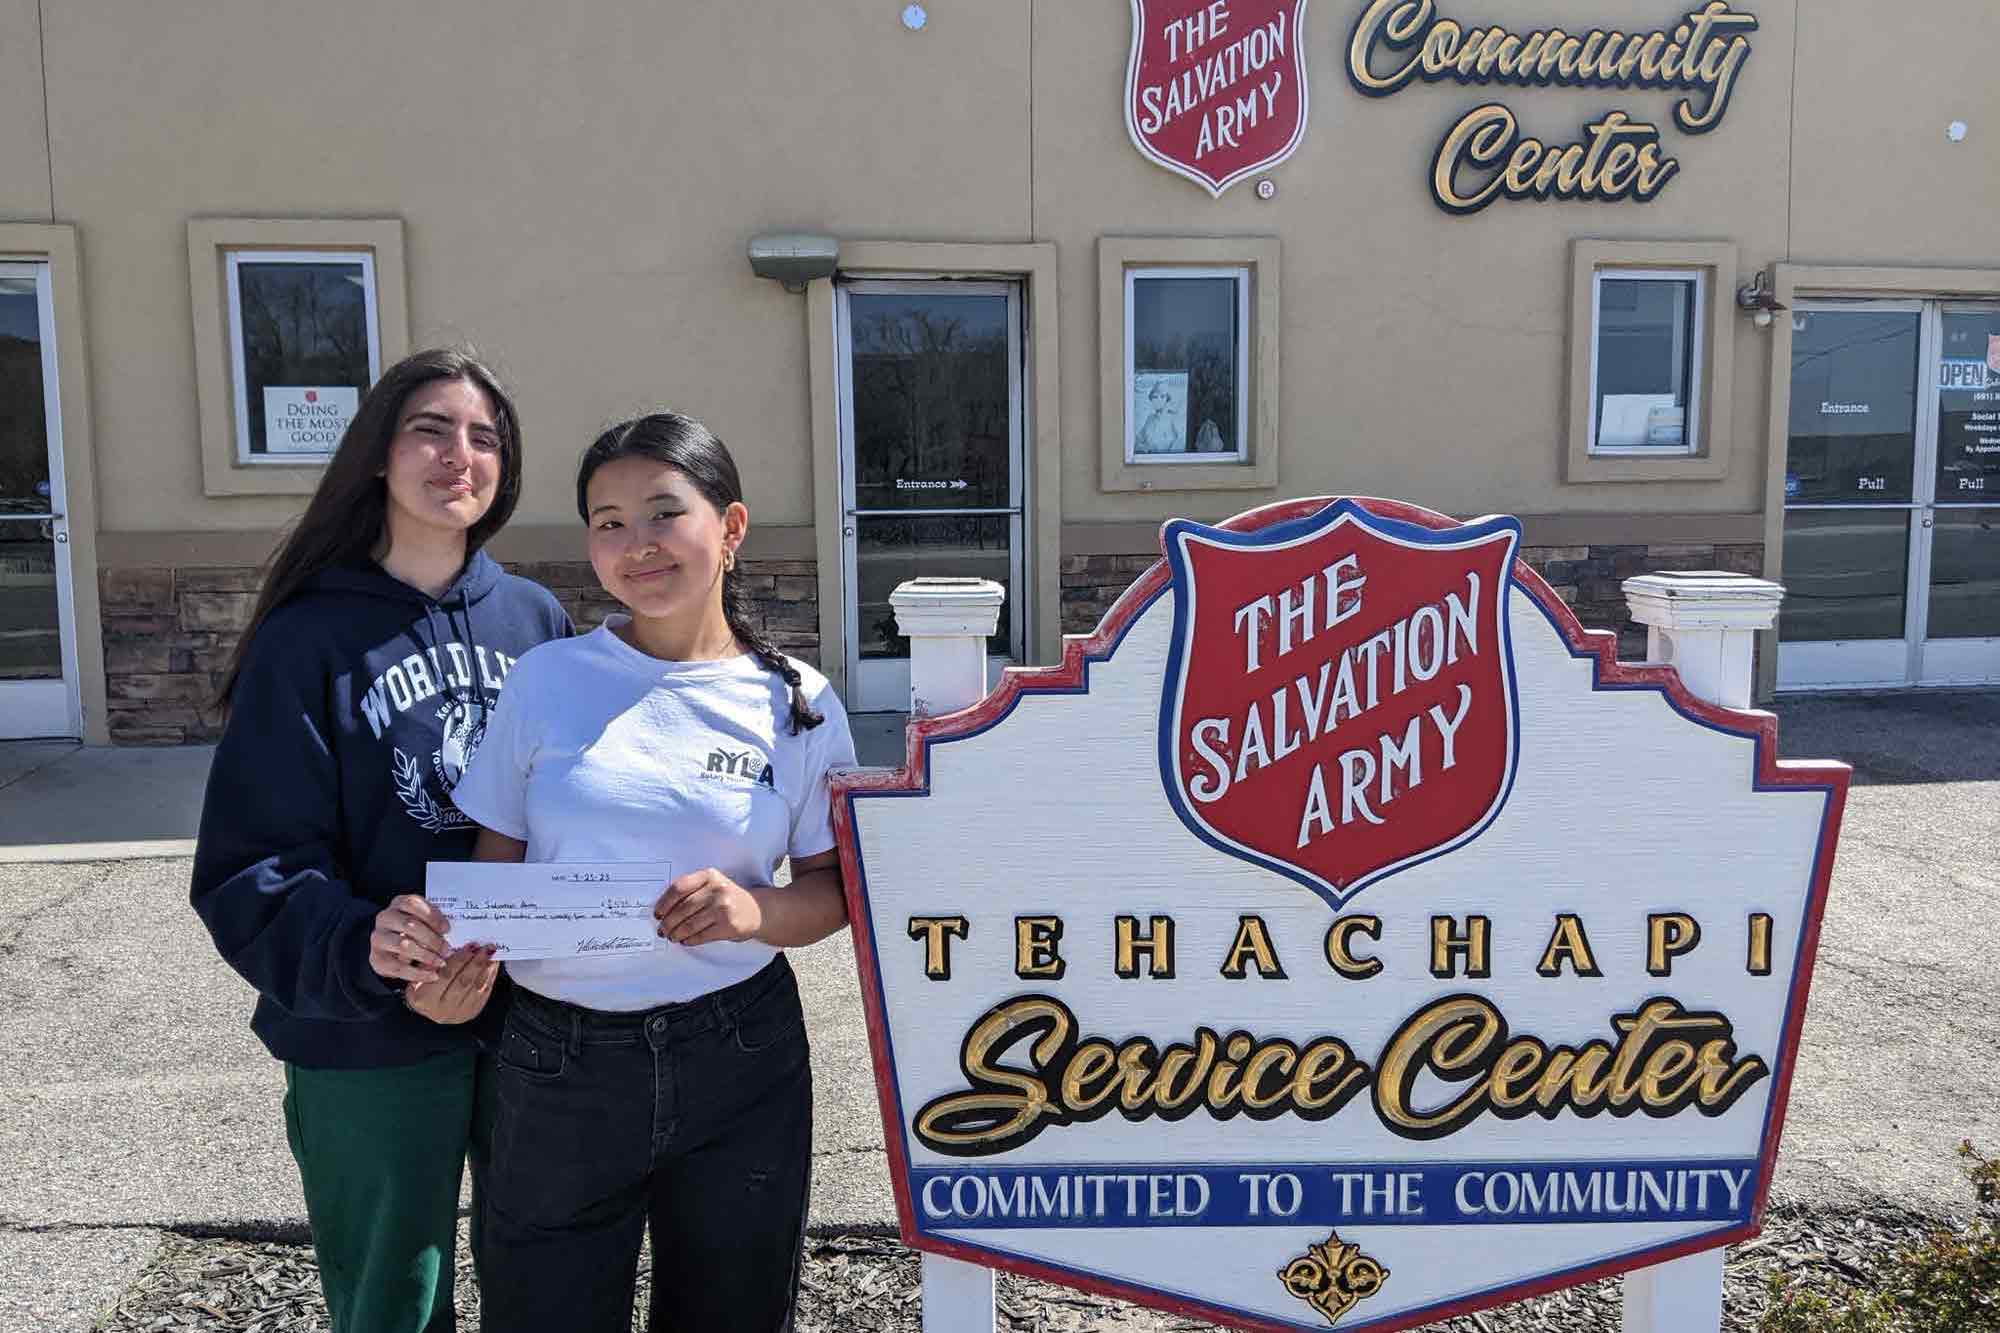 Foreign exchange students leave a lasting impact at the Tehachapi Salvation Army